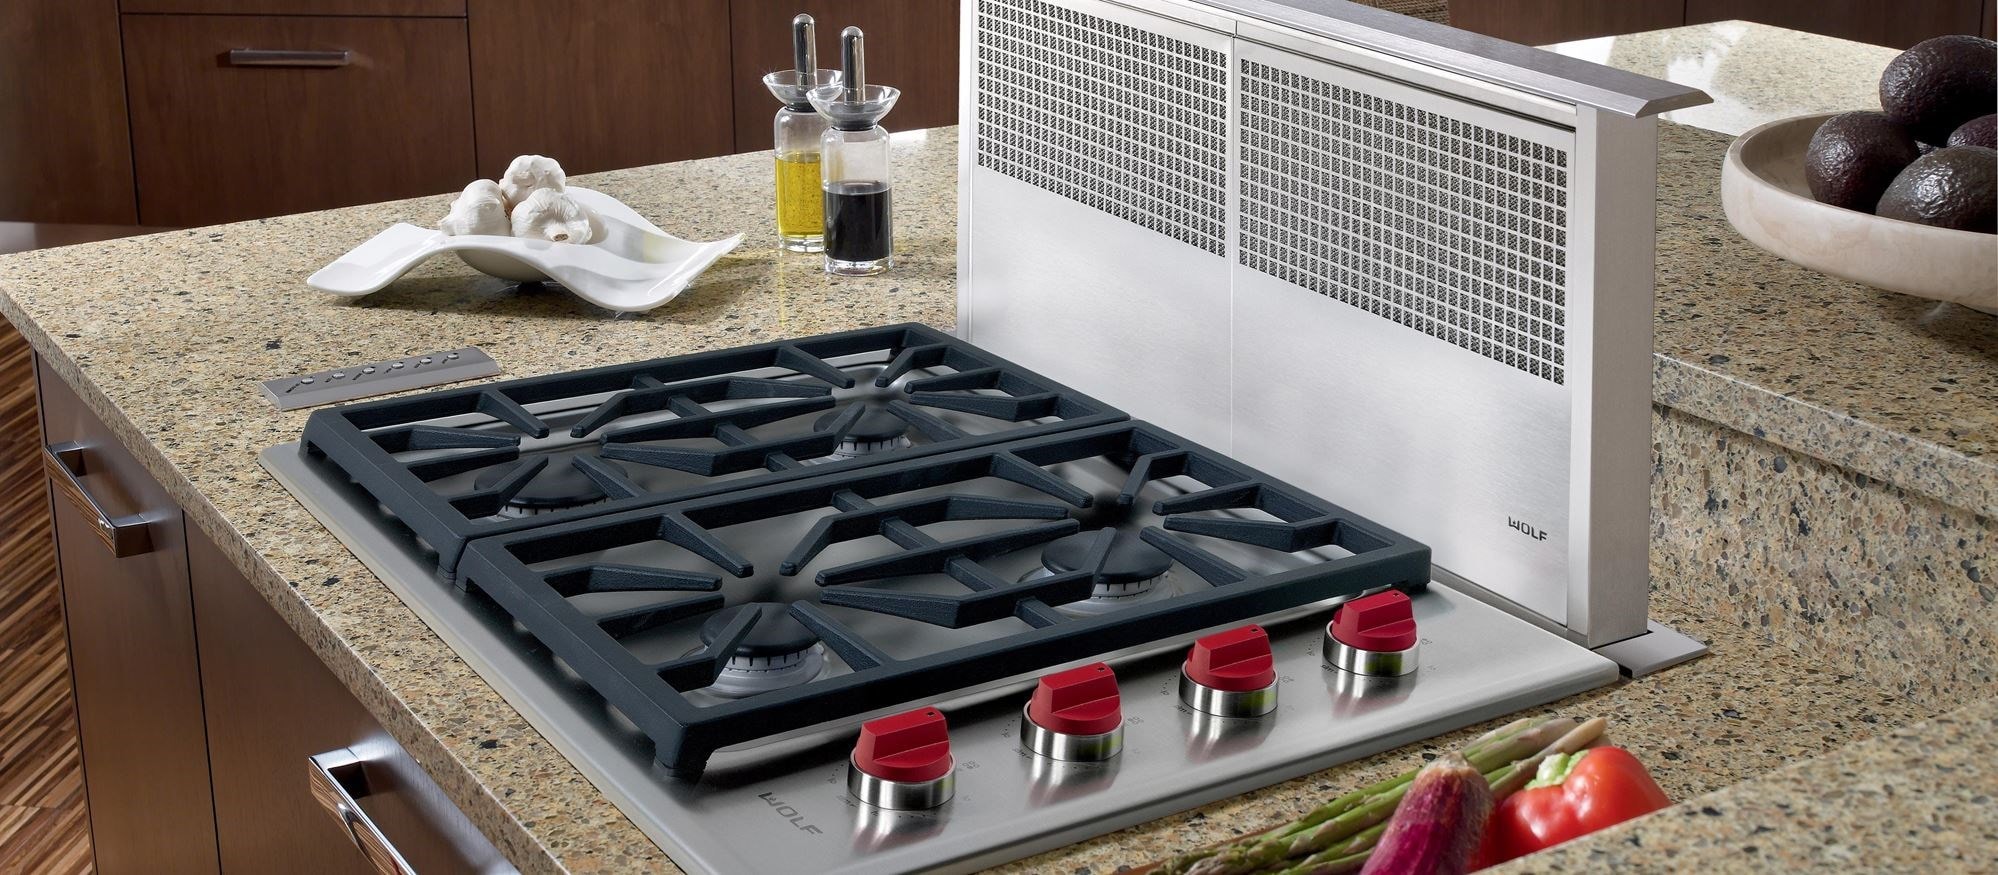 Wolf 36 Professional Gas Cooktop - 5 Burners (CG365P/S)